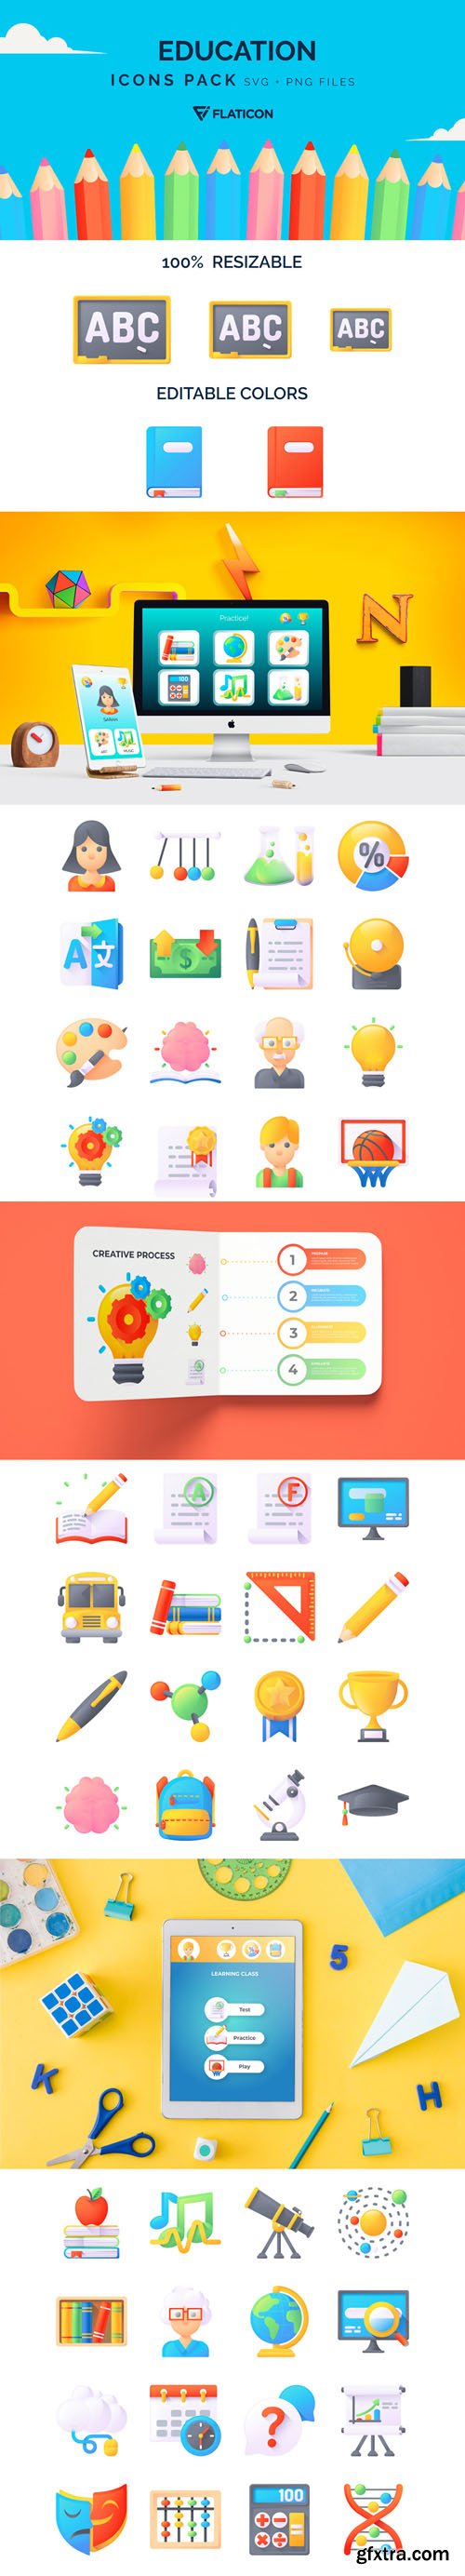 50 Education Icons Pack